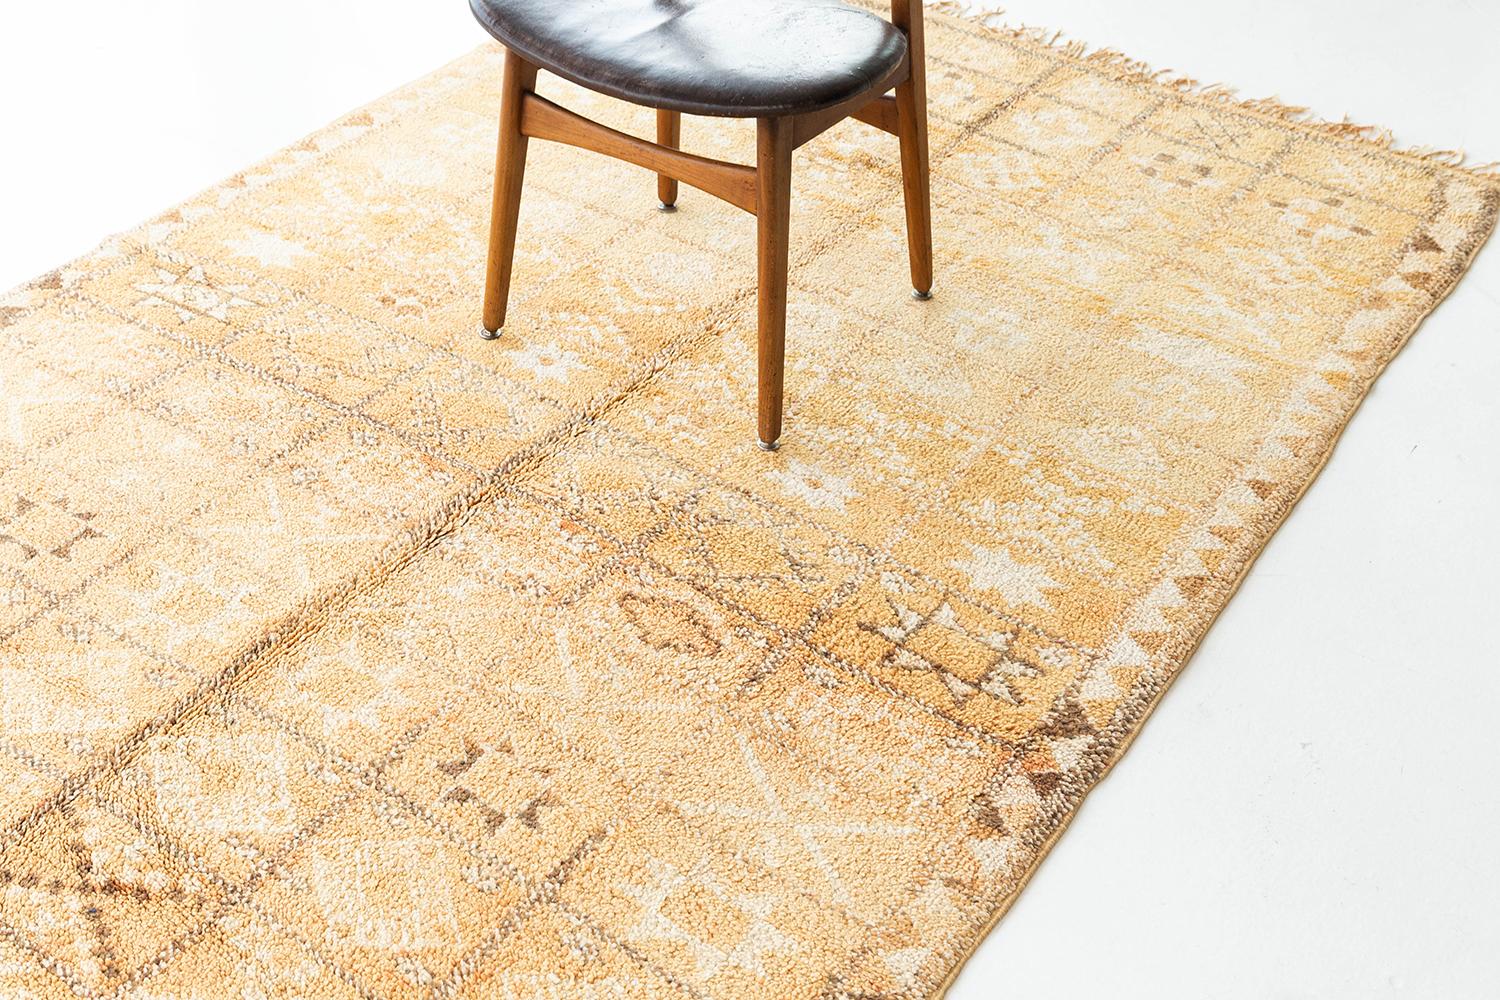 A stunning golden yellow Berber rug from the Middle Atlas Tribe of Morocco. This unique handwoven pile weave will add brighten up any space and will add character with its symbolic imagery and geometric patterning. 


Rug number: 17536
Size: 5'